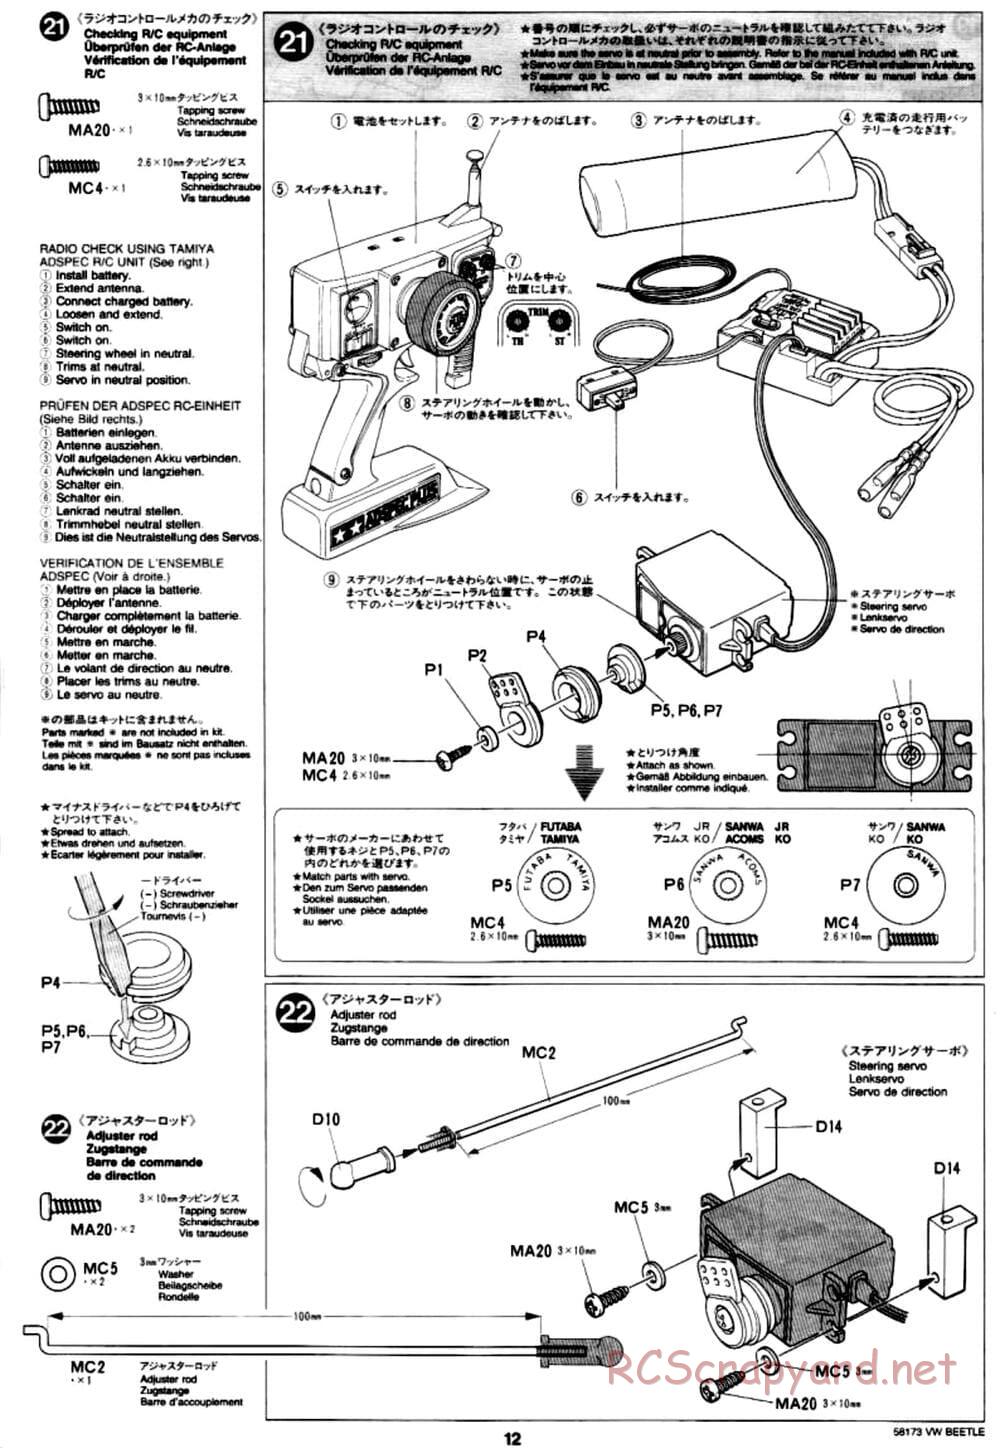 Tamiya - Volkswagen Beetle - M02L Chassis - Manual - Page 12